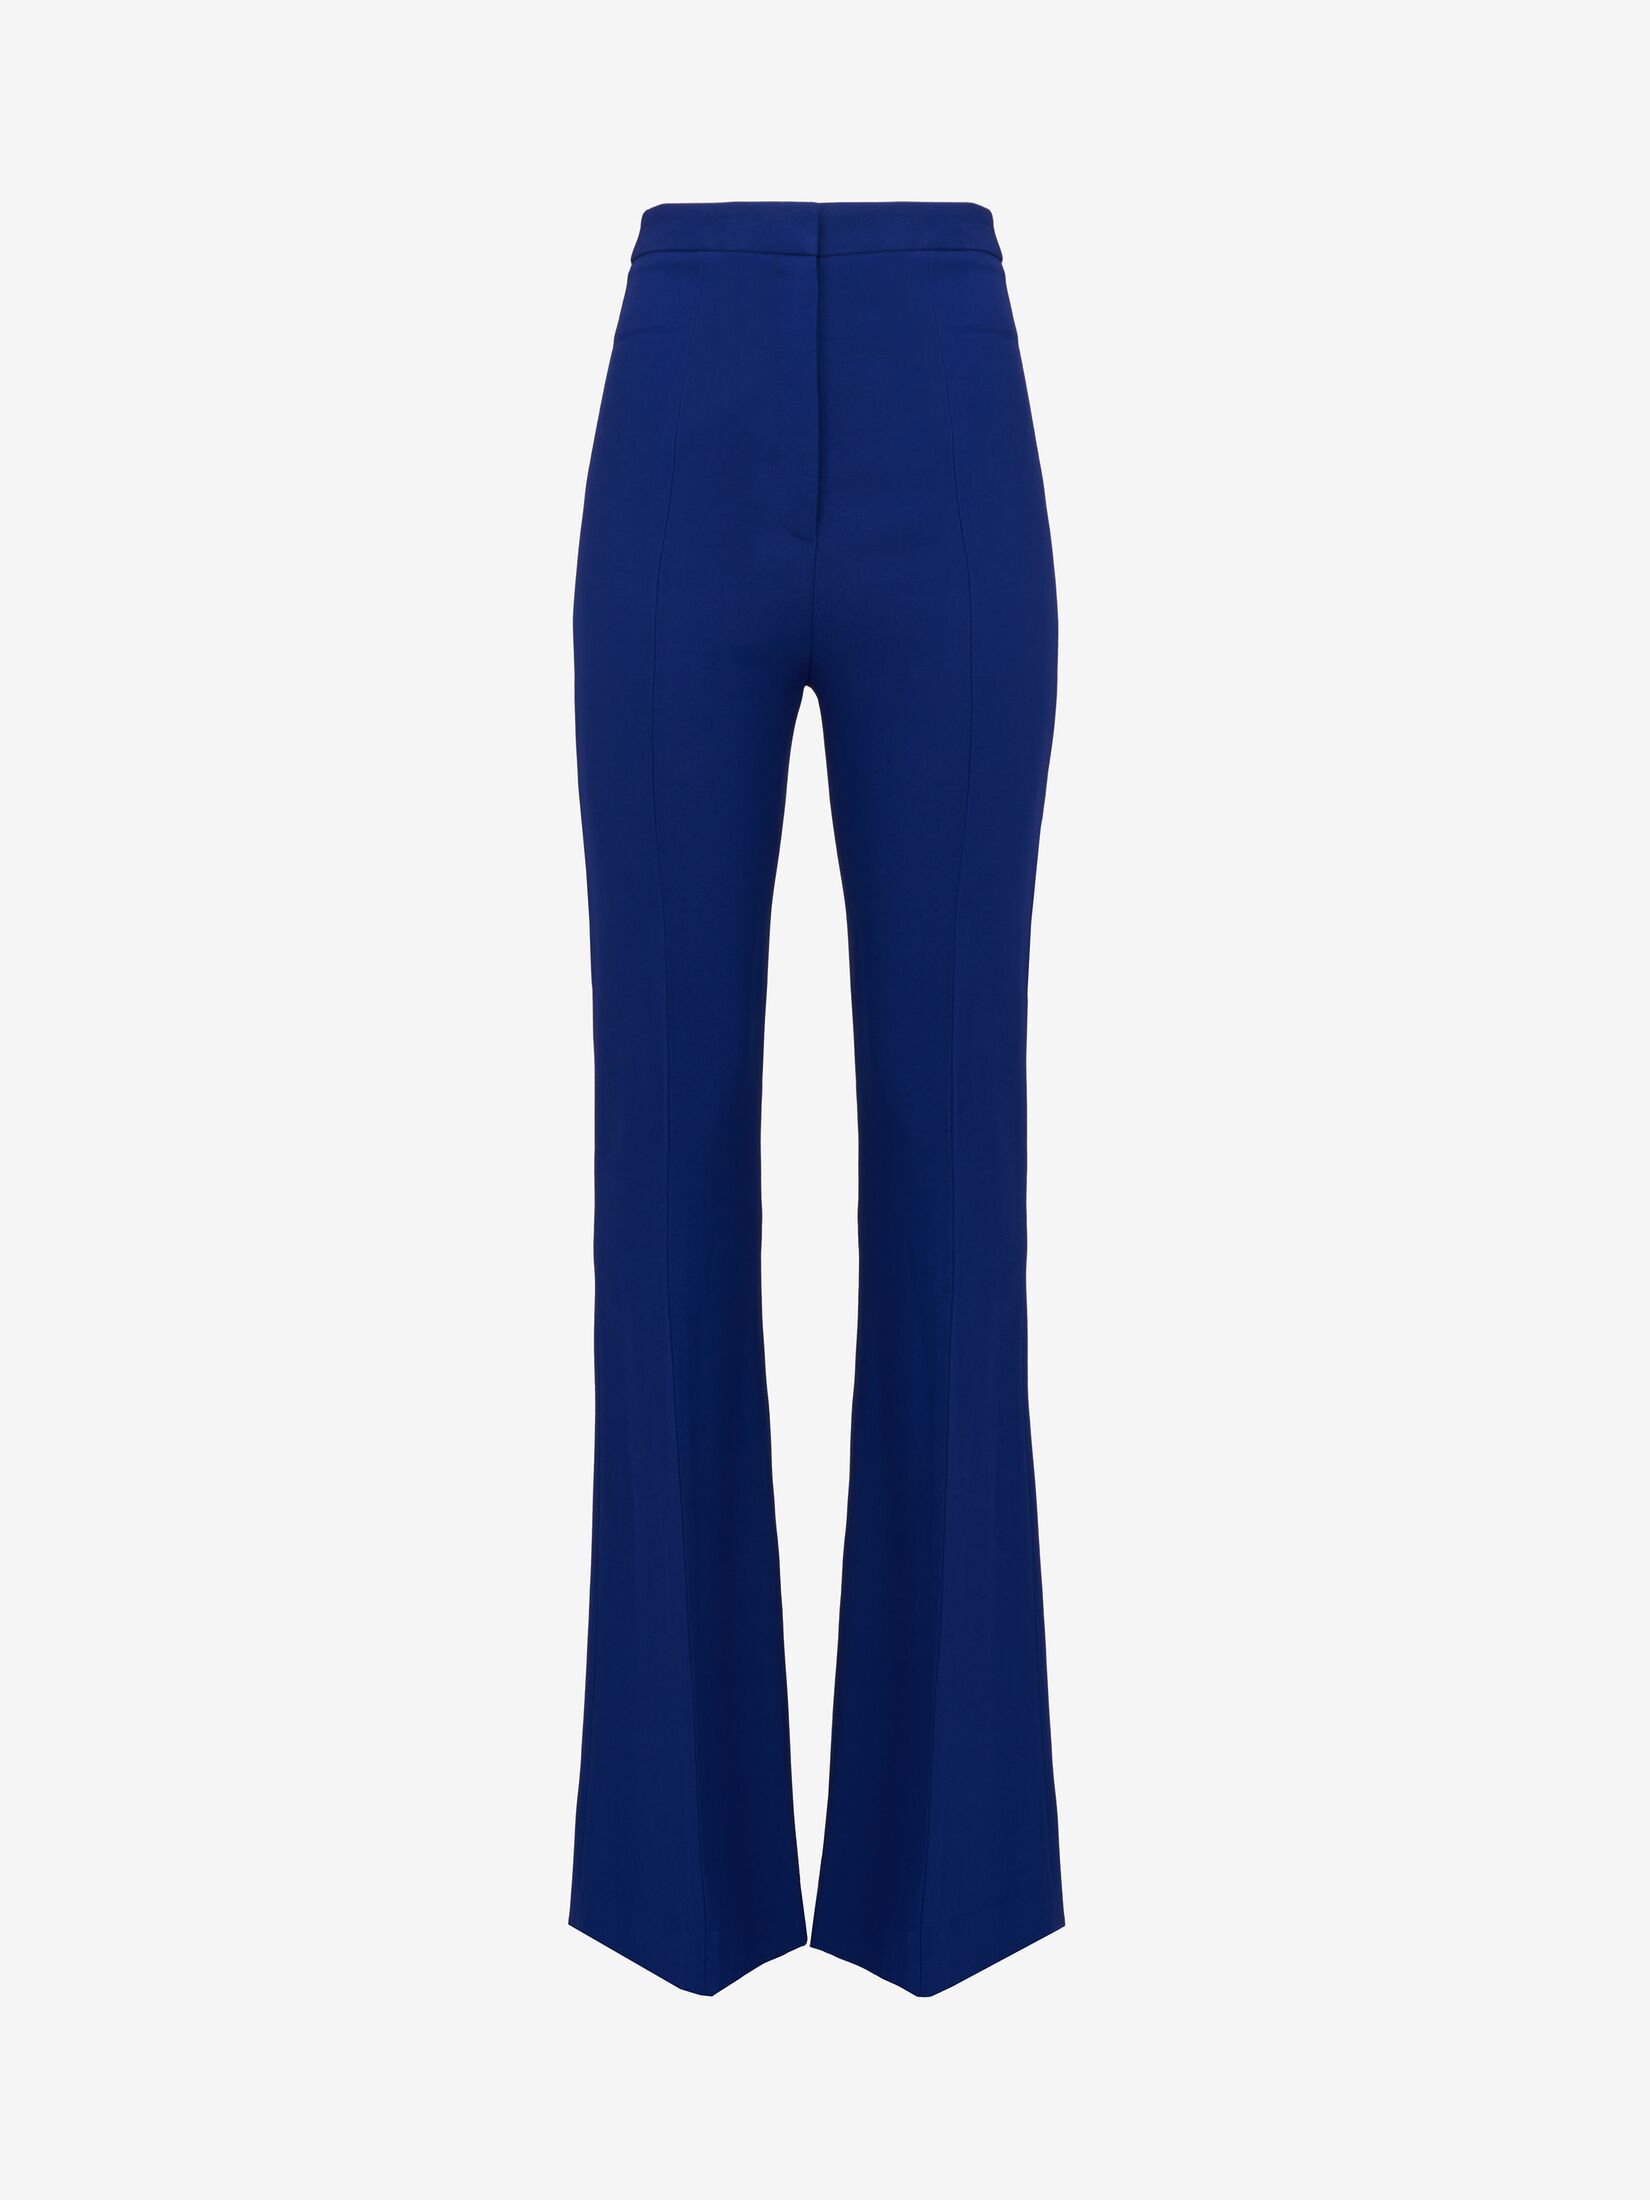 Buy TNQ Womens Raw Silk Pants Narrow Bottom Casual Ethnic Trousers (Waist  Size XL 30 to 37 XXL 38 to 42) Online @ ₹499 from ShopClues